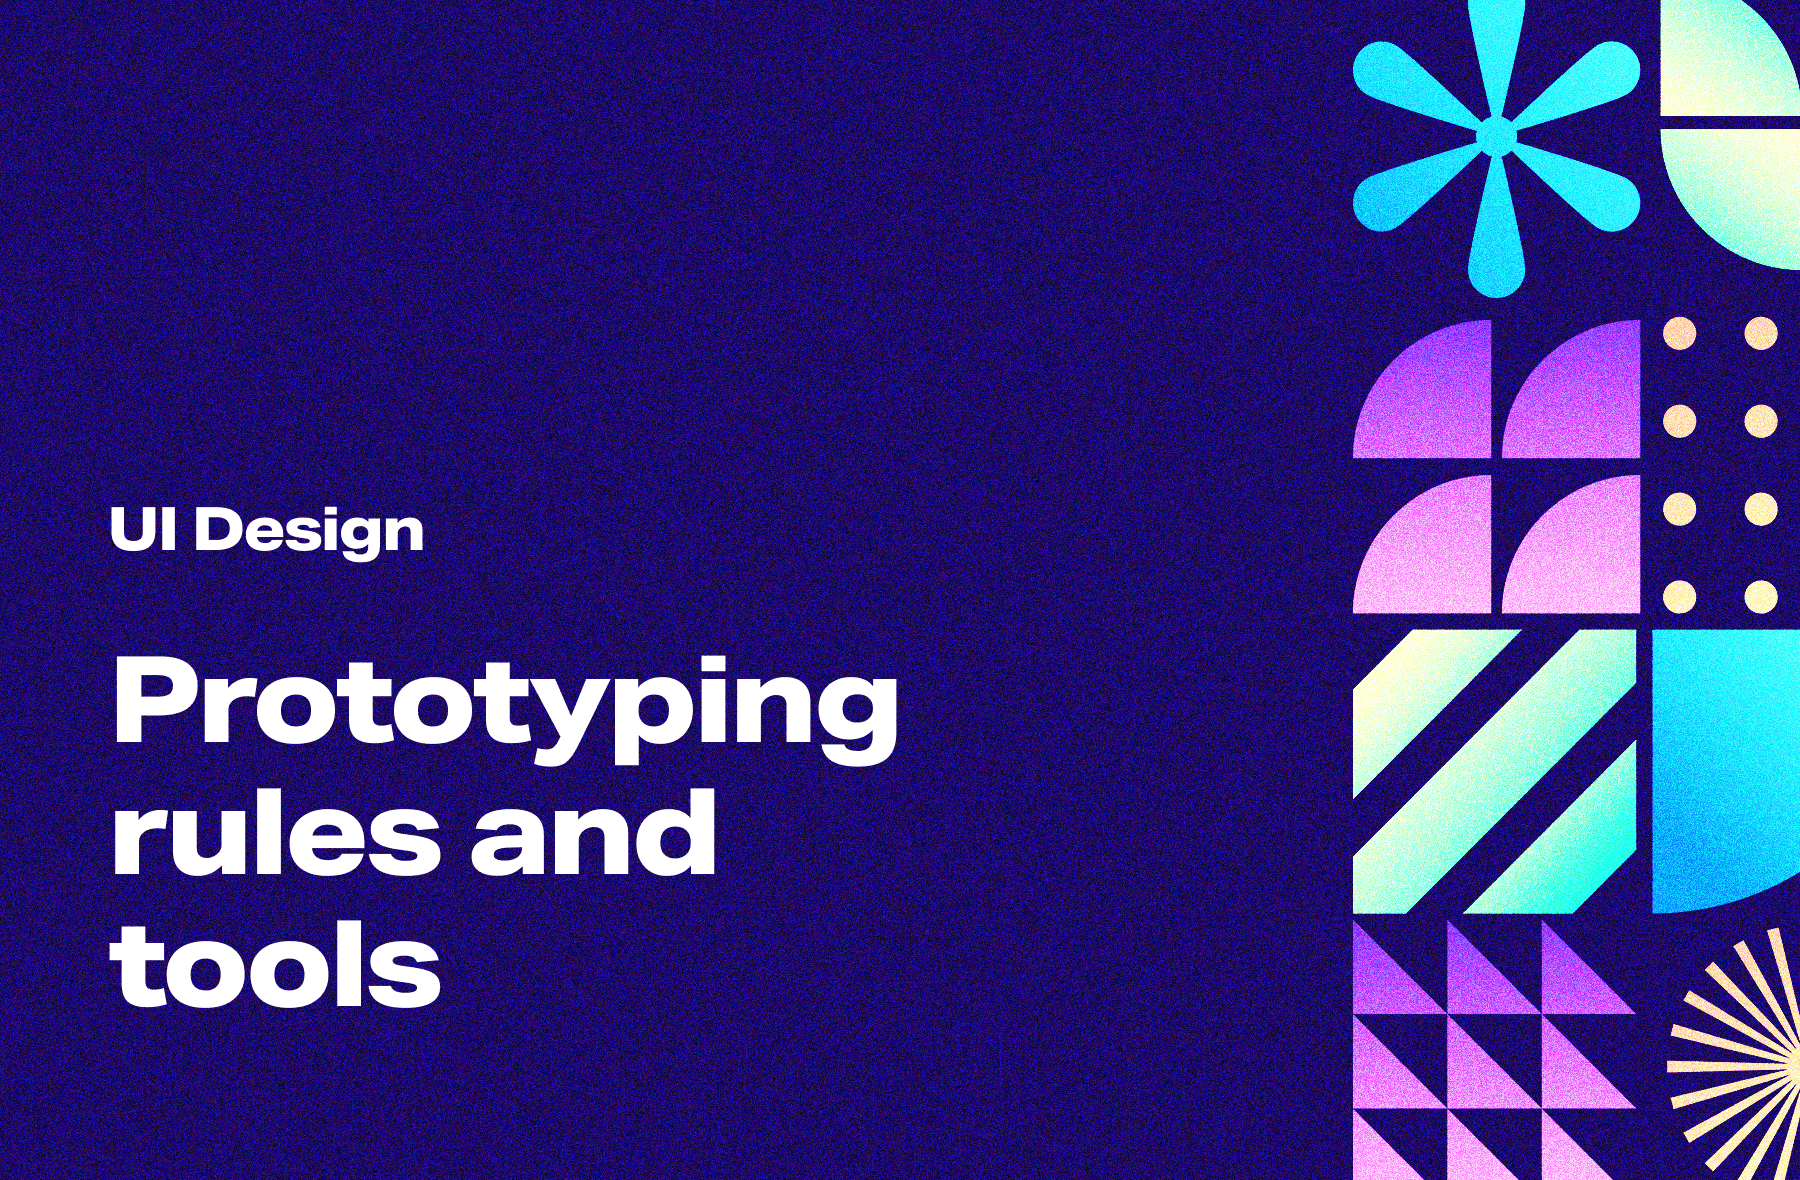 The best prototyping tools are more or less the same. Pick ones that fit your project and team